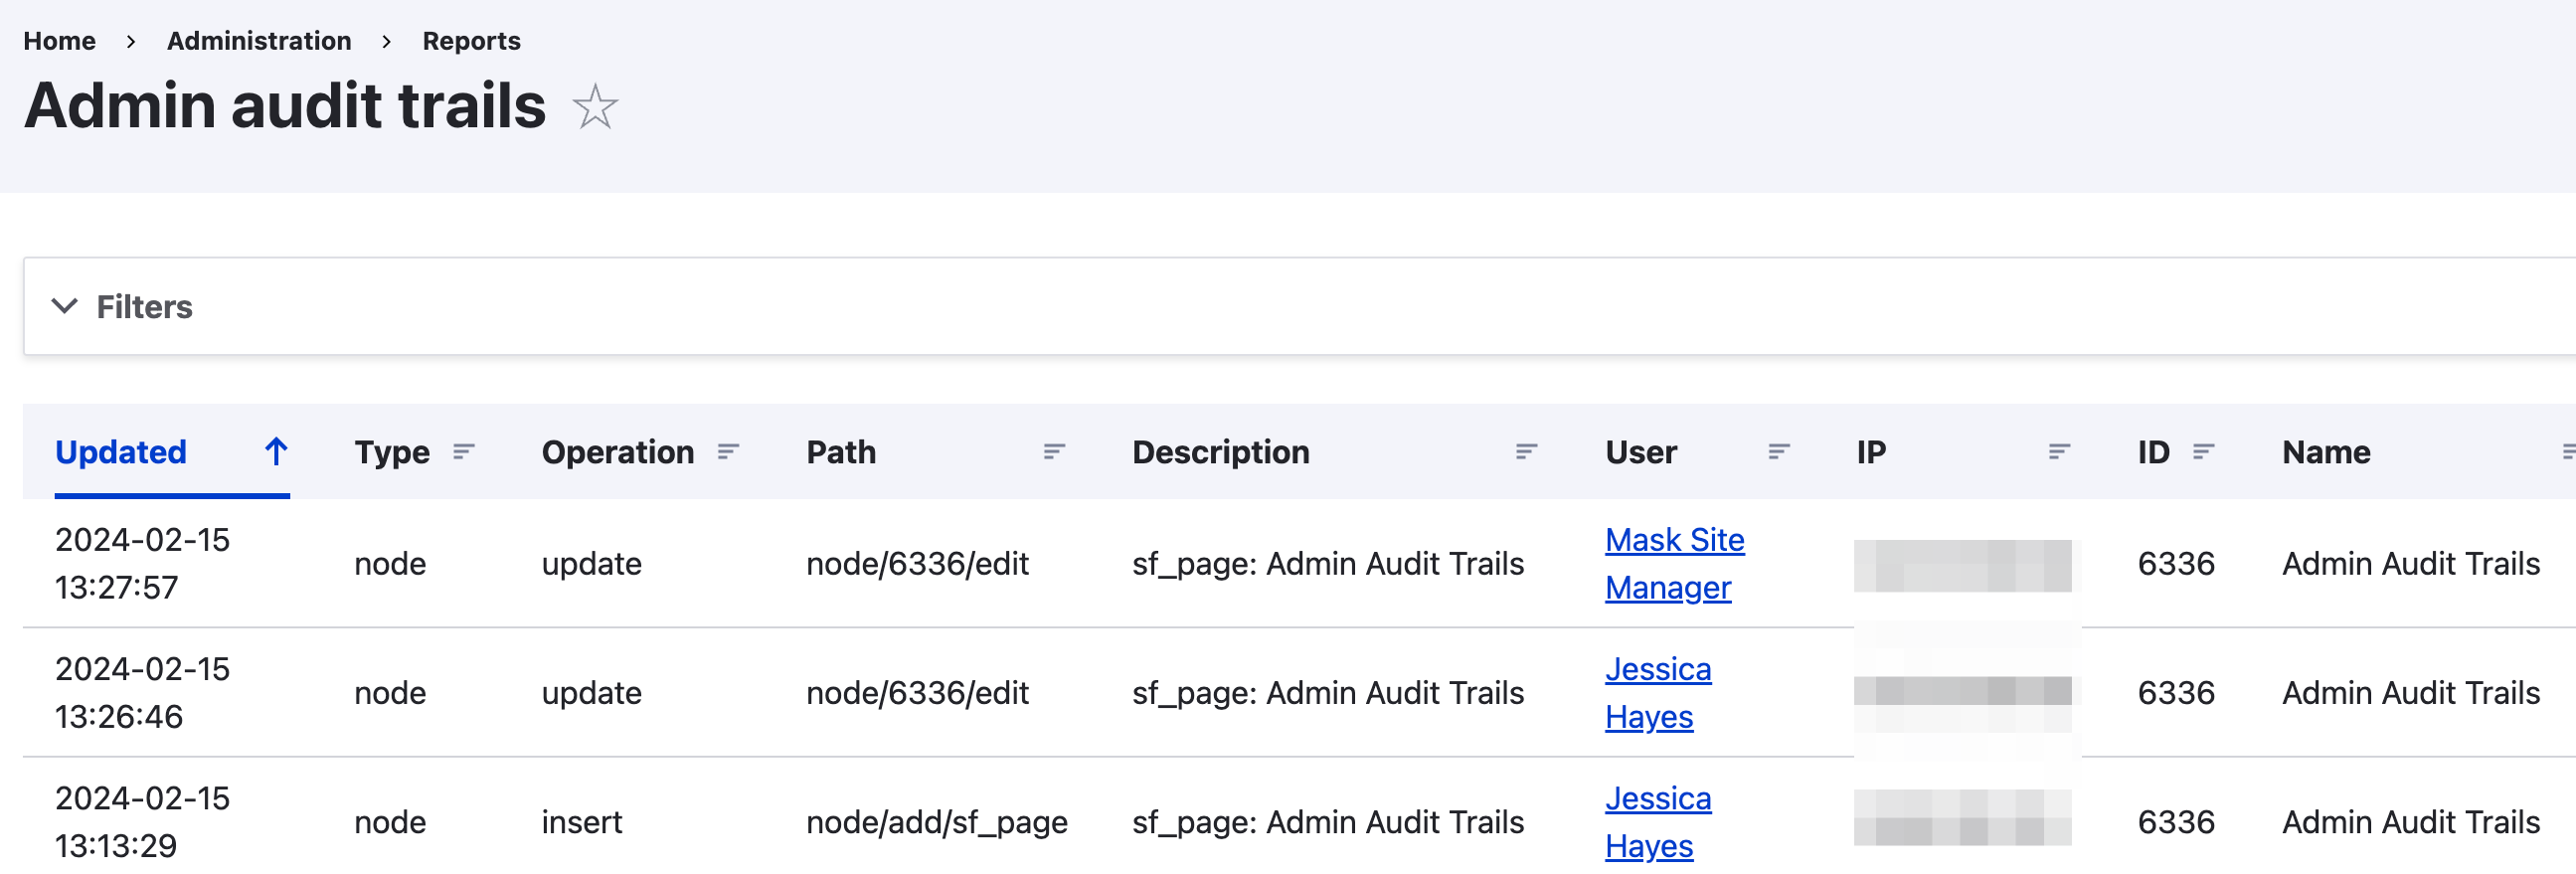 Screenshot of the Admin Audit Trail screen displaying the filter option along with the data table of collected changes to the site.